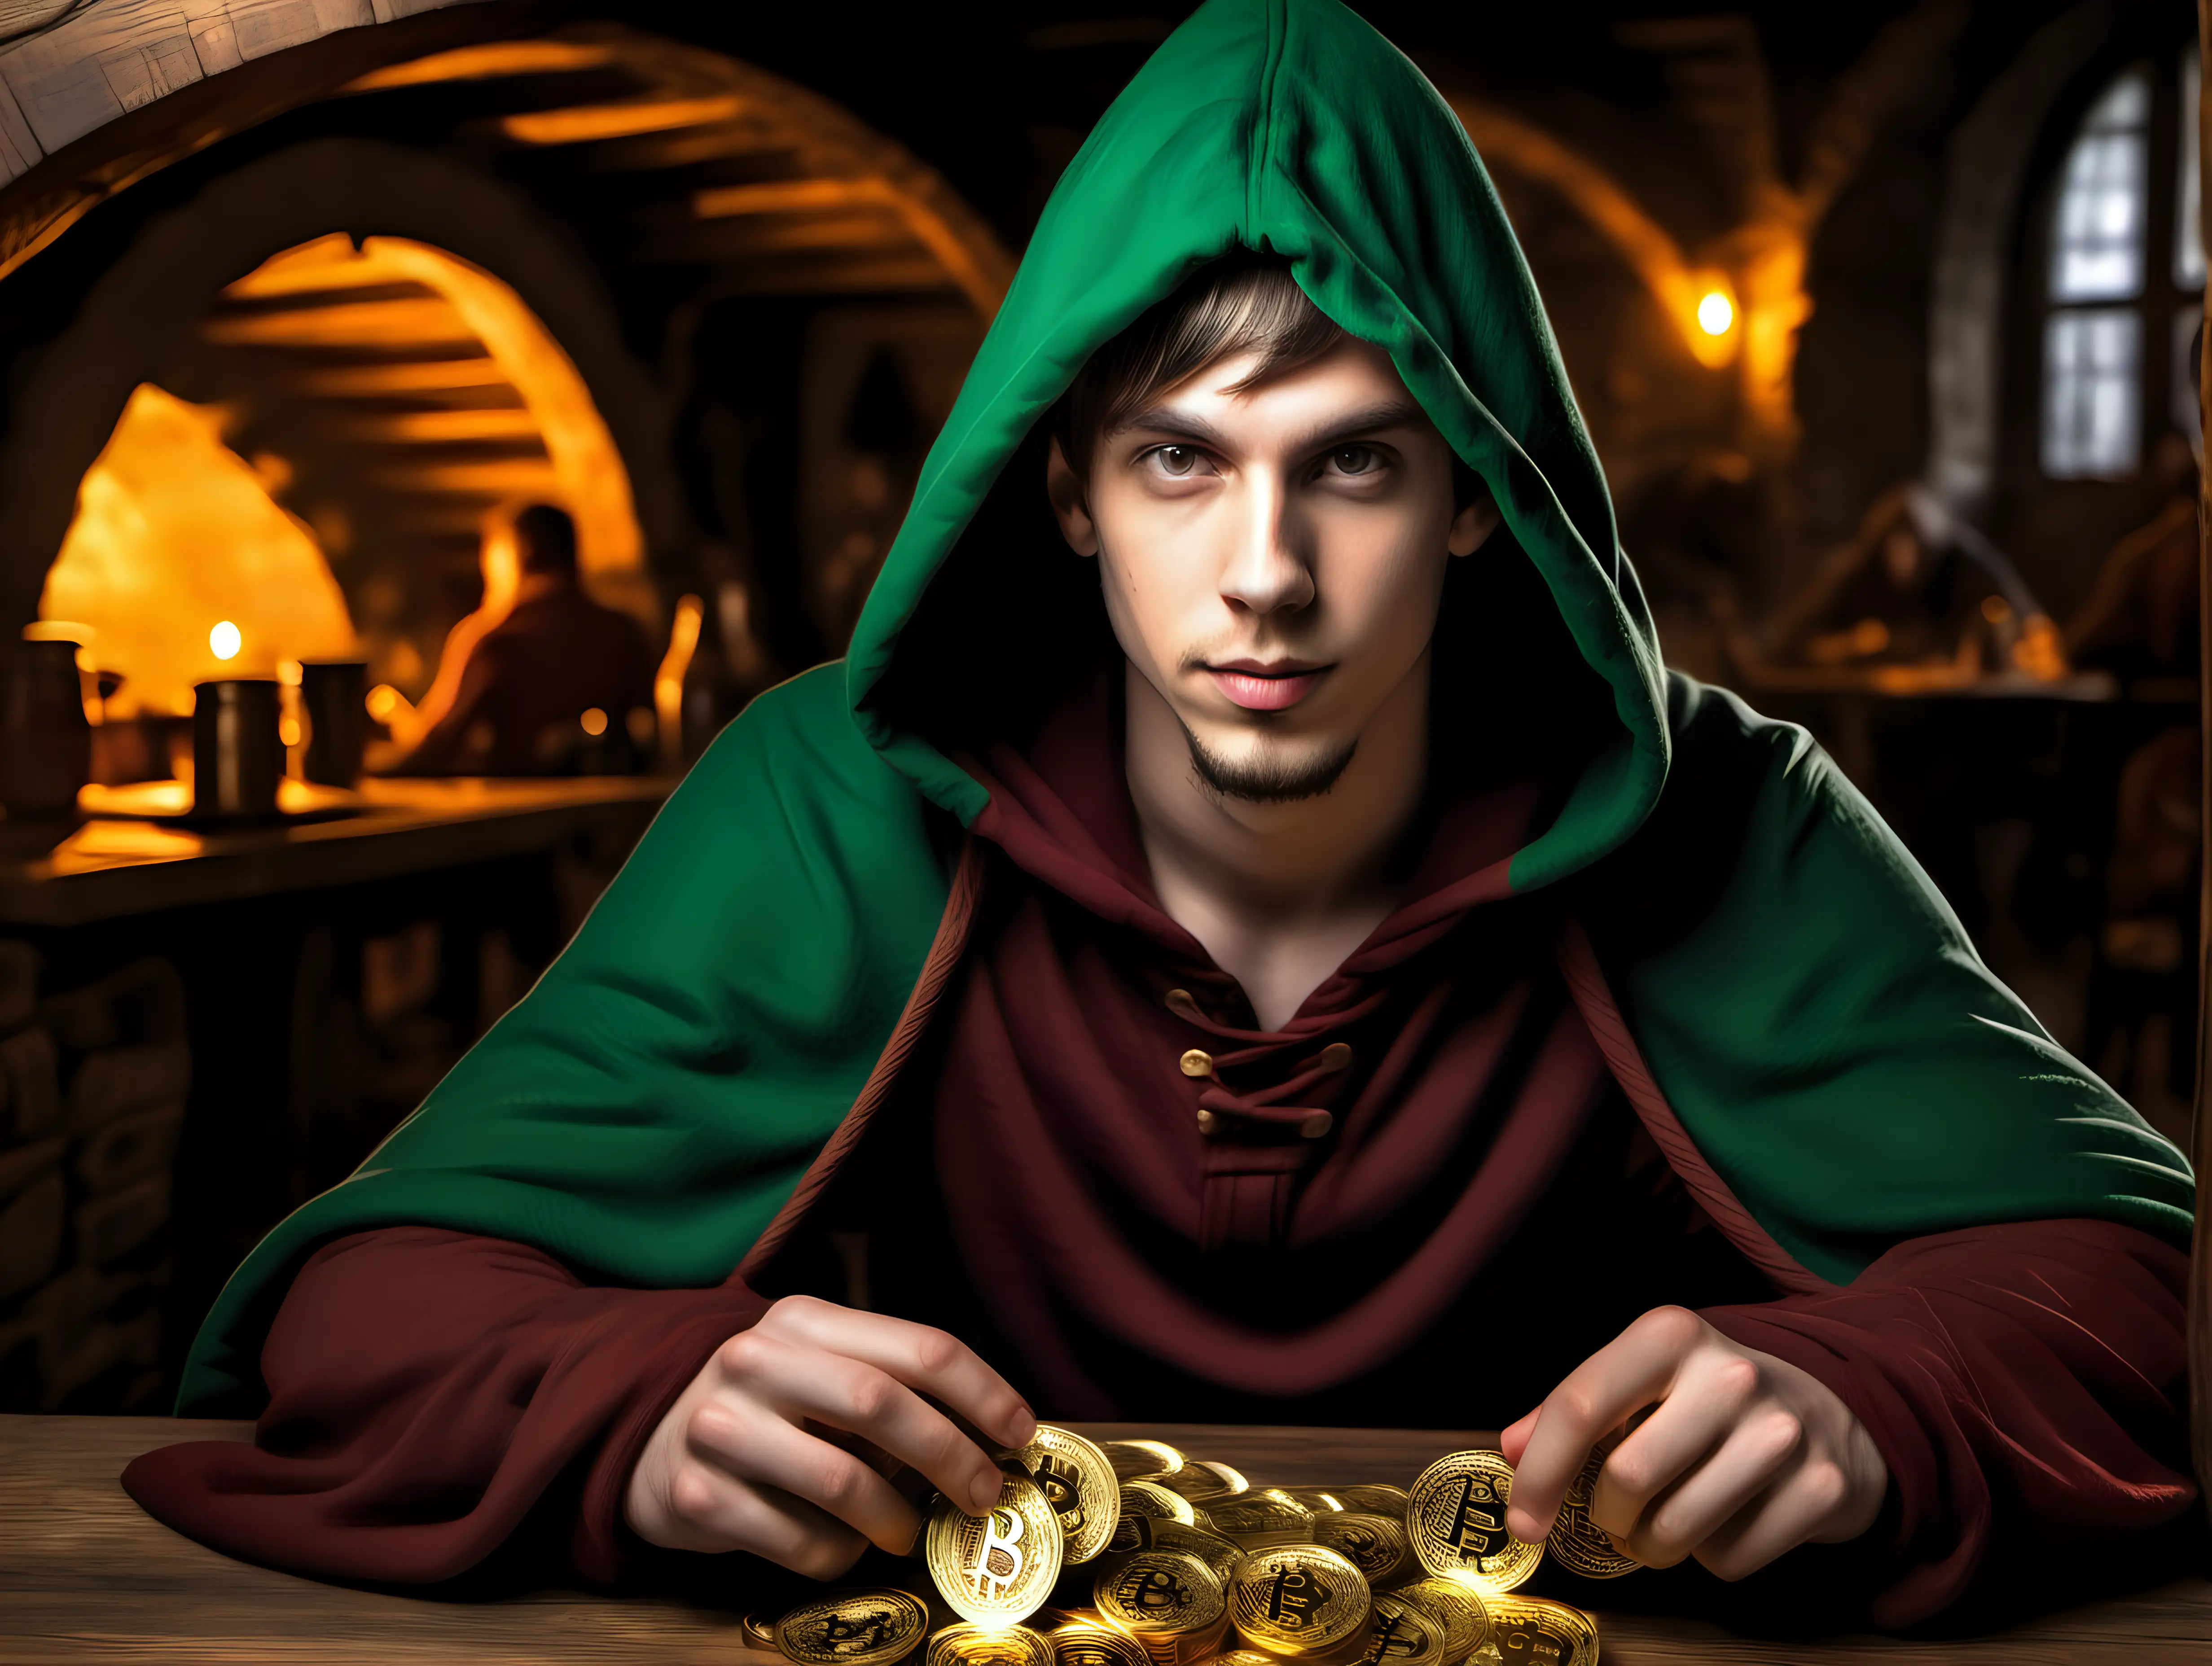 Handsome 22 year old male half elf wearing a hooded cloak in a medieval tavern but naked under the hoodie, betting gold Bitcoins in card games, short beard, mysterious in a detailed fantasy style with bitcoins guldens